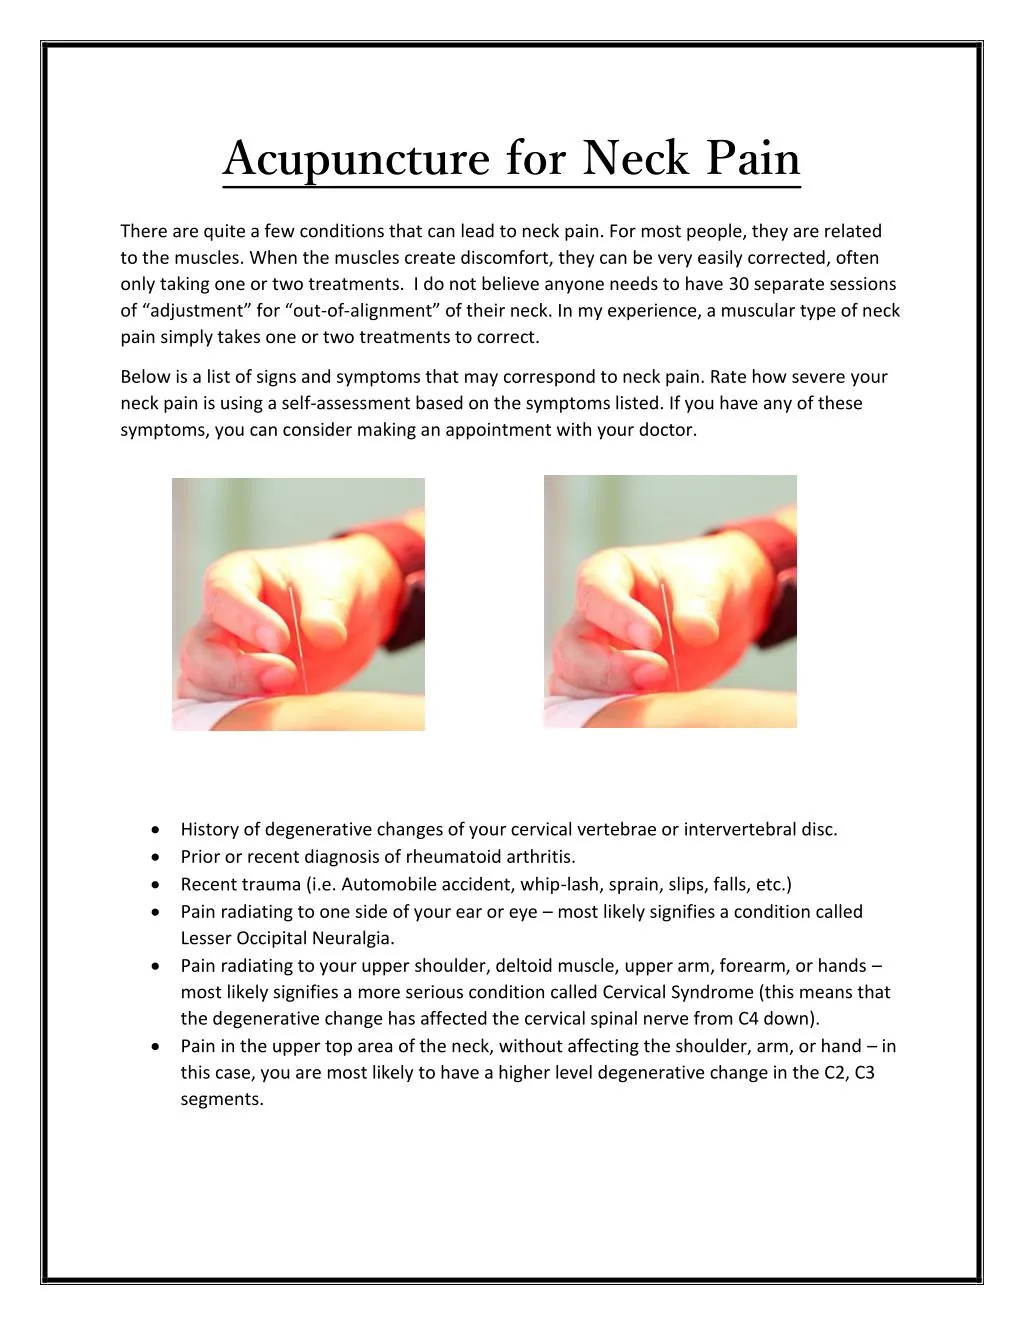 acupuncture for neck pain